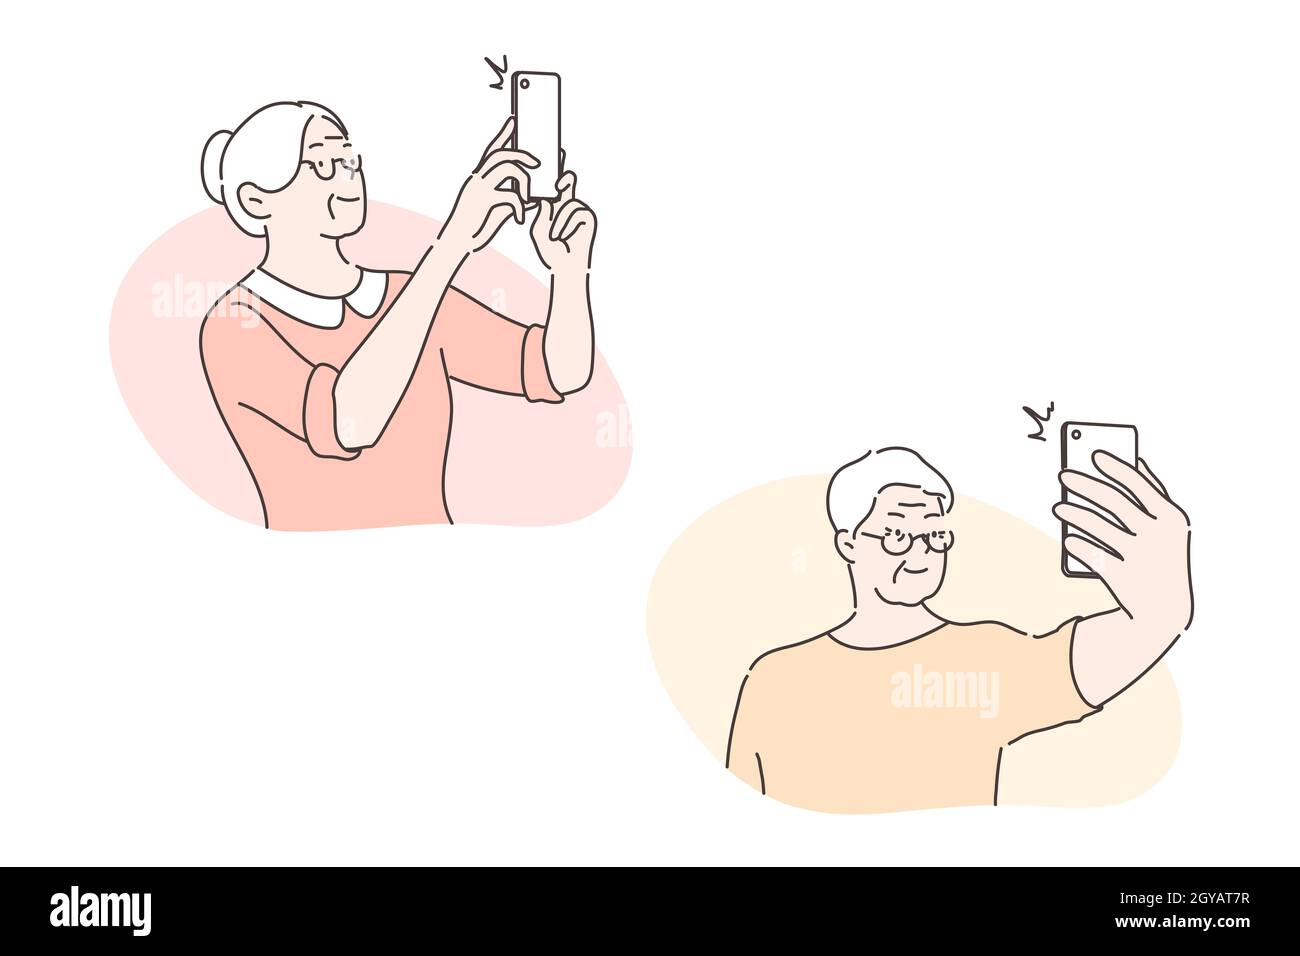 Elder people take selfie, social media set concept. Old man and woman take selfie using mobile phone or smartphone. Techonologically advanced grandfat Stock Photo